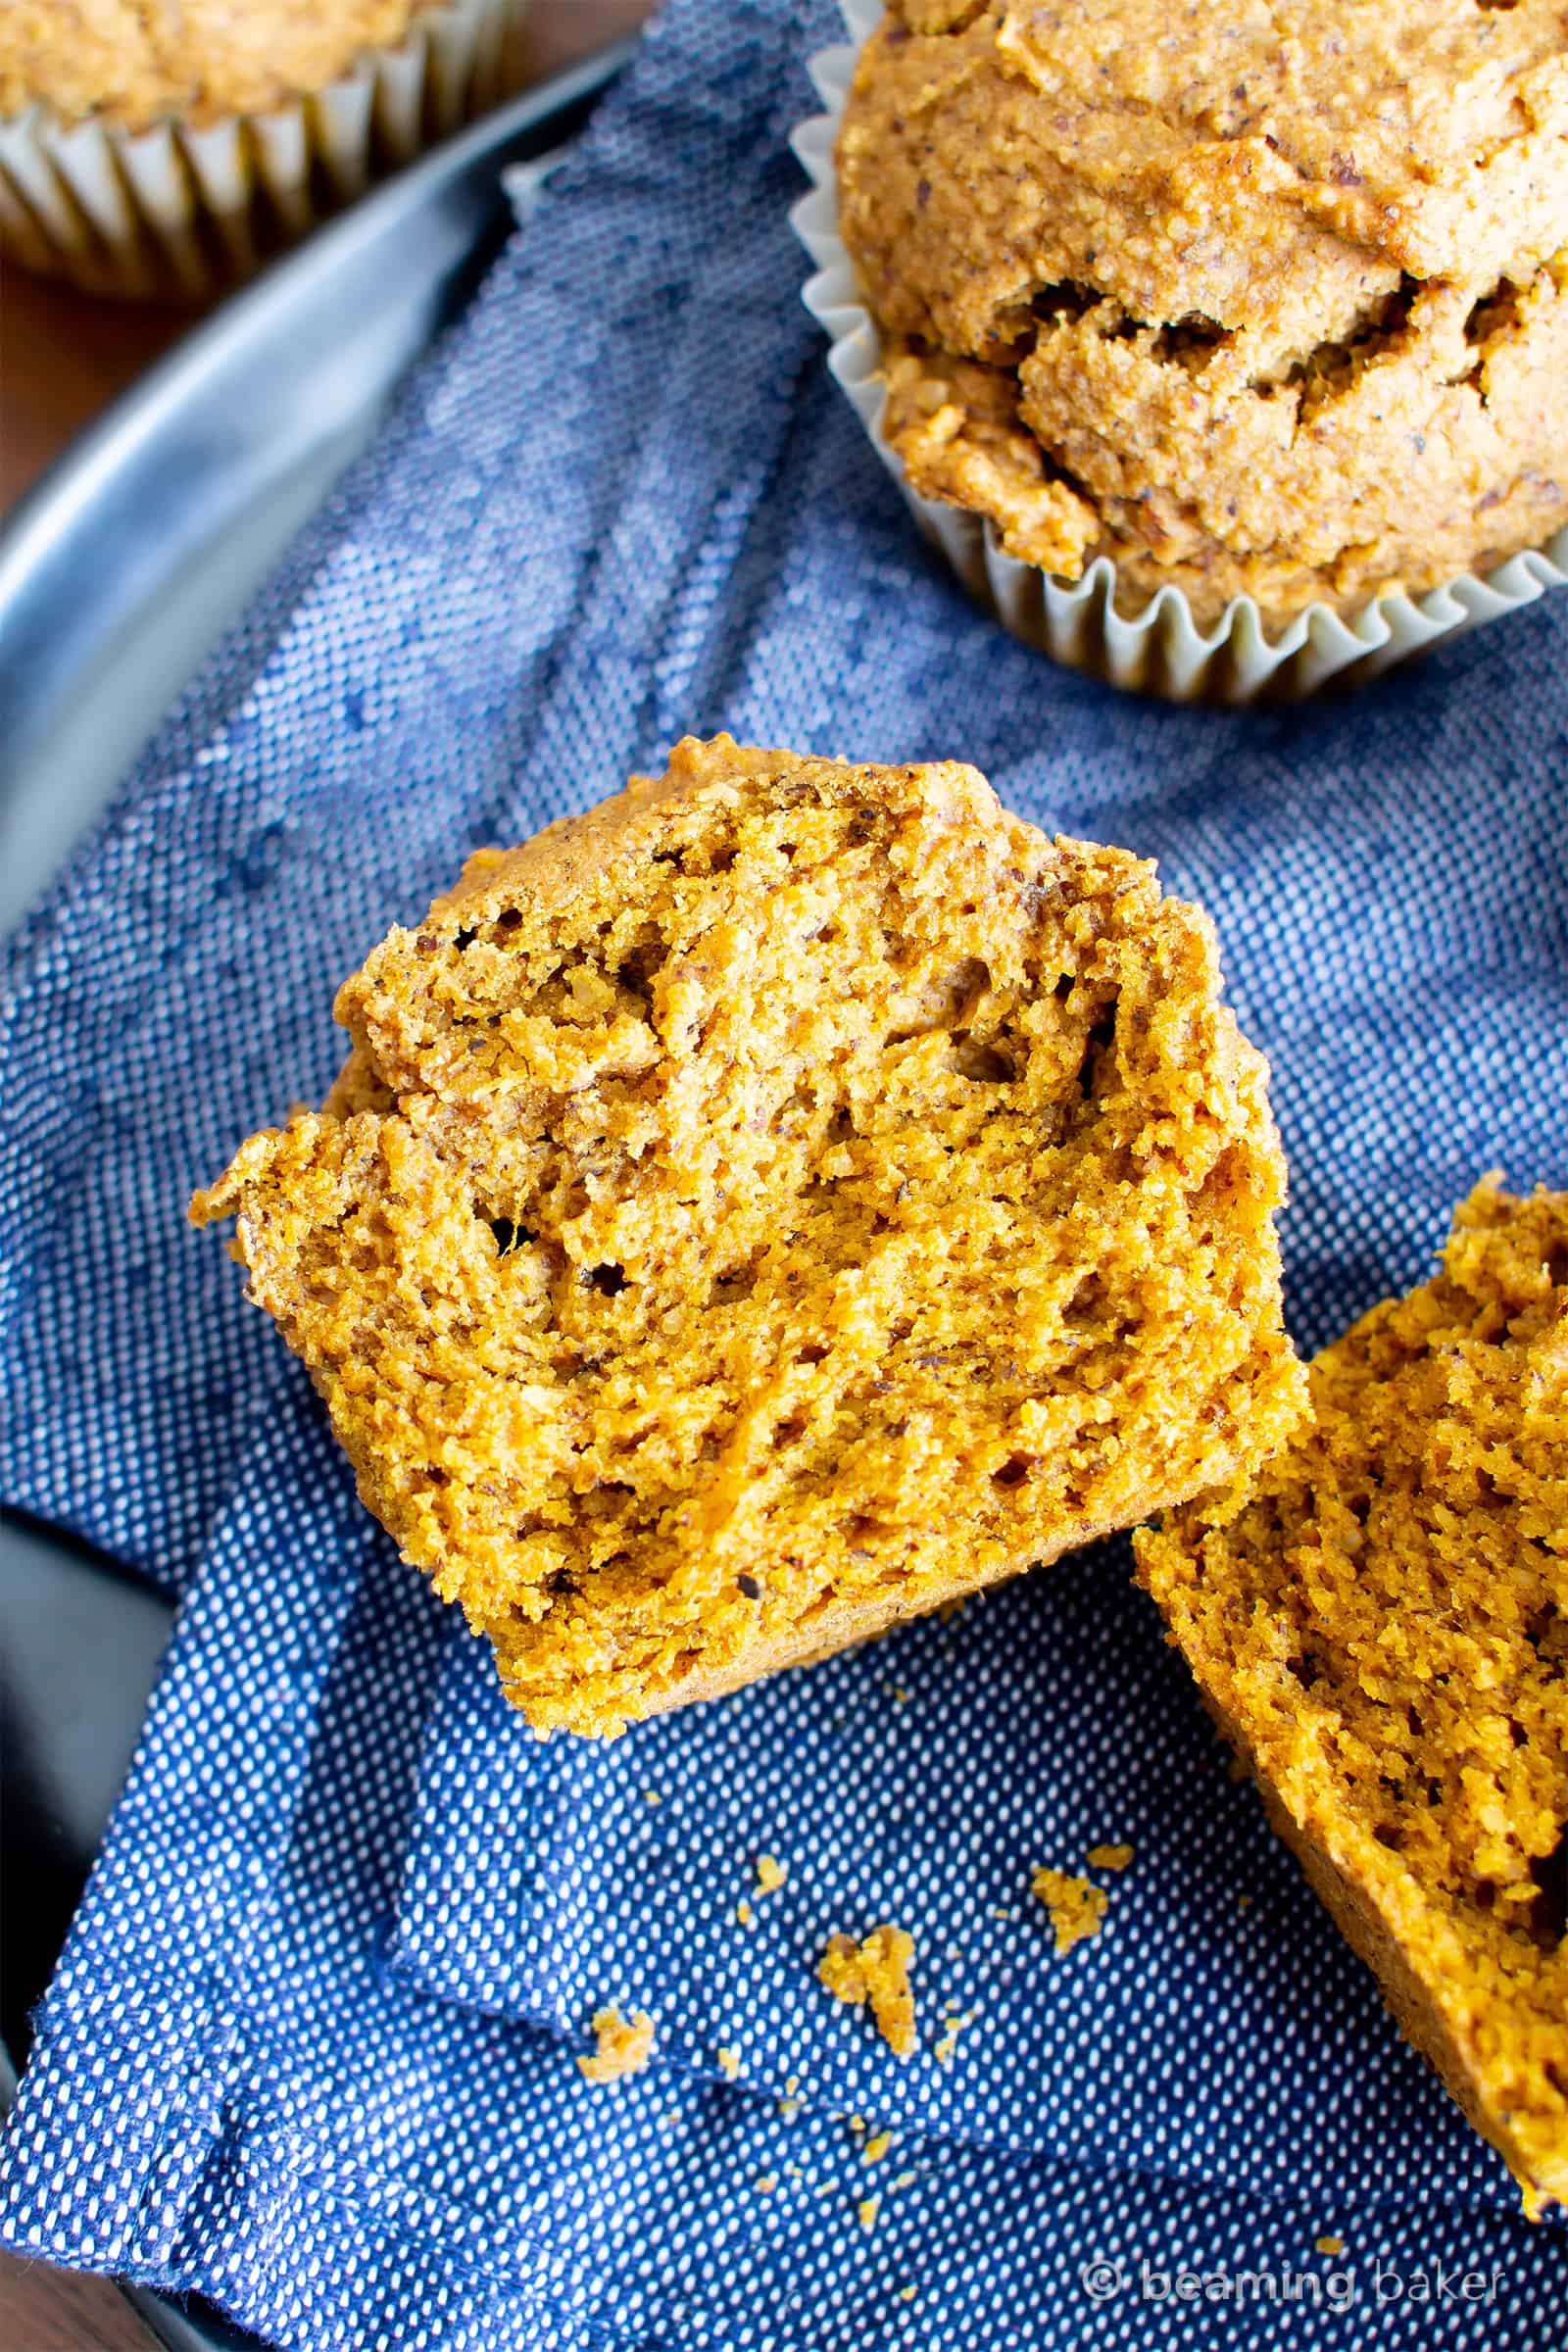 Easy Vegan Gluten Free Pumpkin Muffins Recipe (V, GF): an easy recipe for moist ‘n fluffy pumpkin muffins bursting with your favorite fall spices. Made with healthy, whole ingredients. #Vegan #GlutenFree #Pumpkin #Muffins #PumpkinSpice #DairyFree #Healthy #Fall #RefinedSugarFree | Recipe at BeamingBaker.com